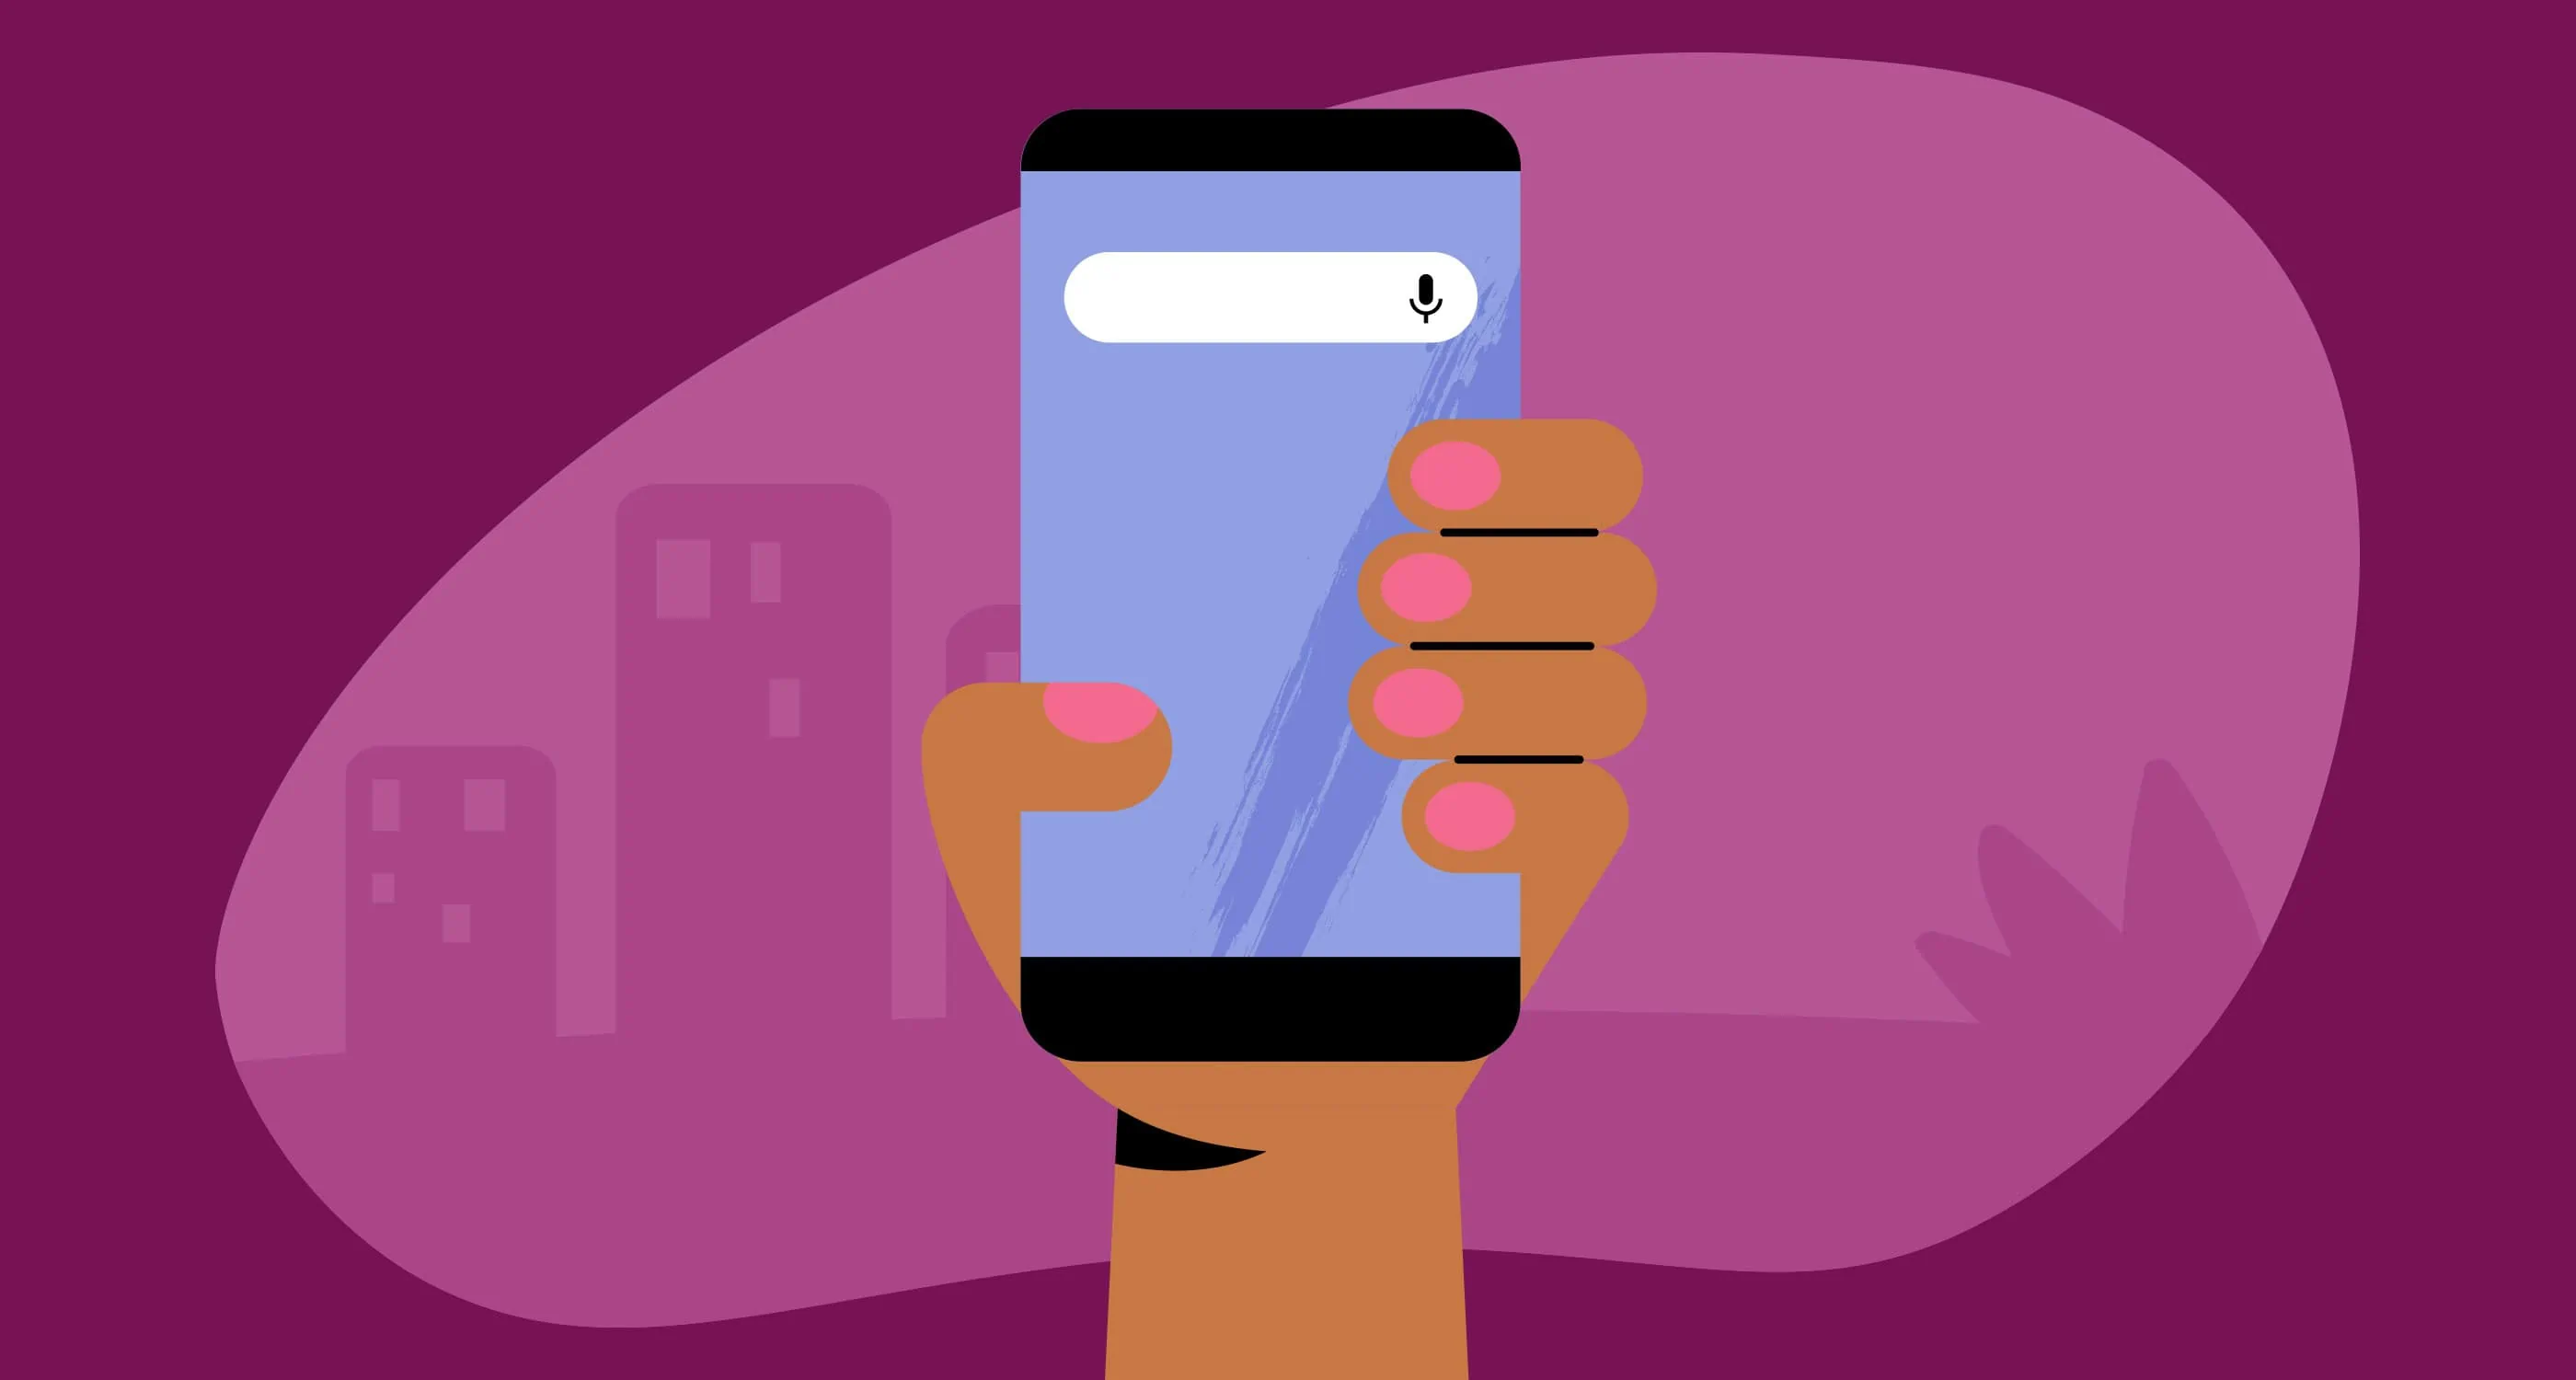 An illustration of a phone with an empty search bar being held by a hand with brown skin and pink nails. The background is dark purple with a lighter purple abstract shape that shows shadows of city buildings.